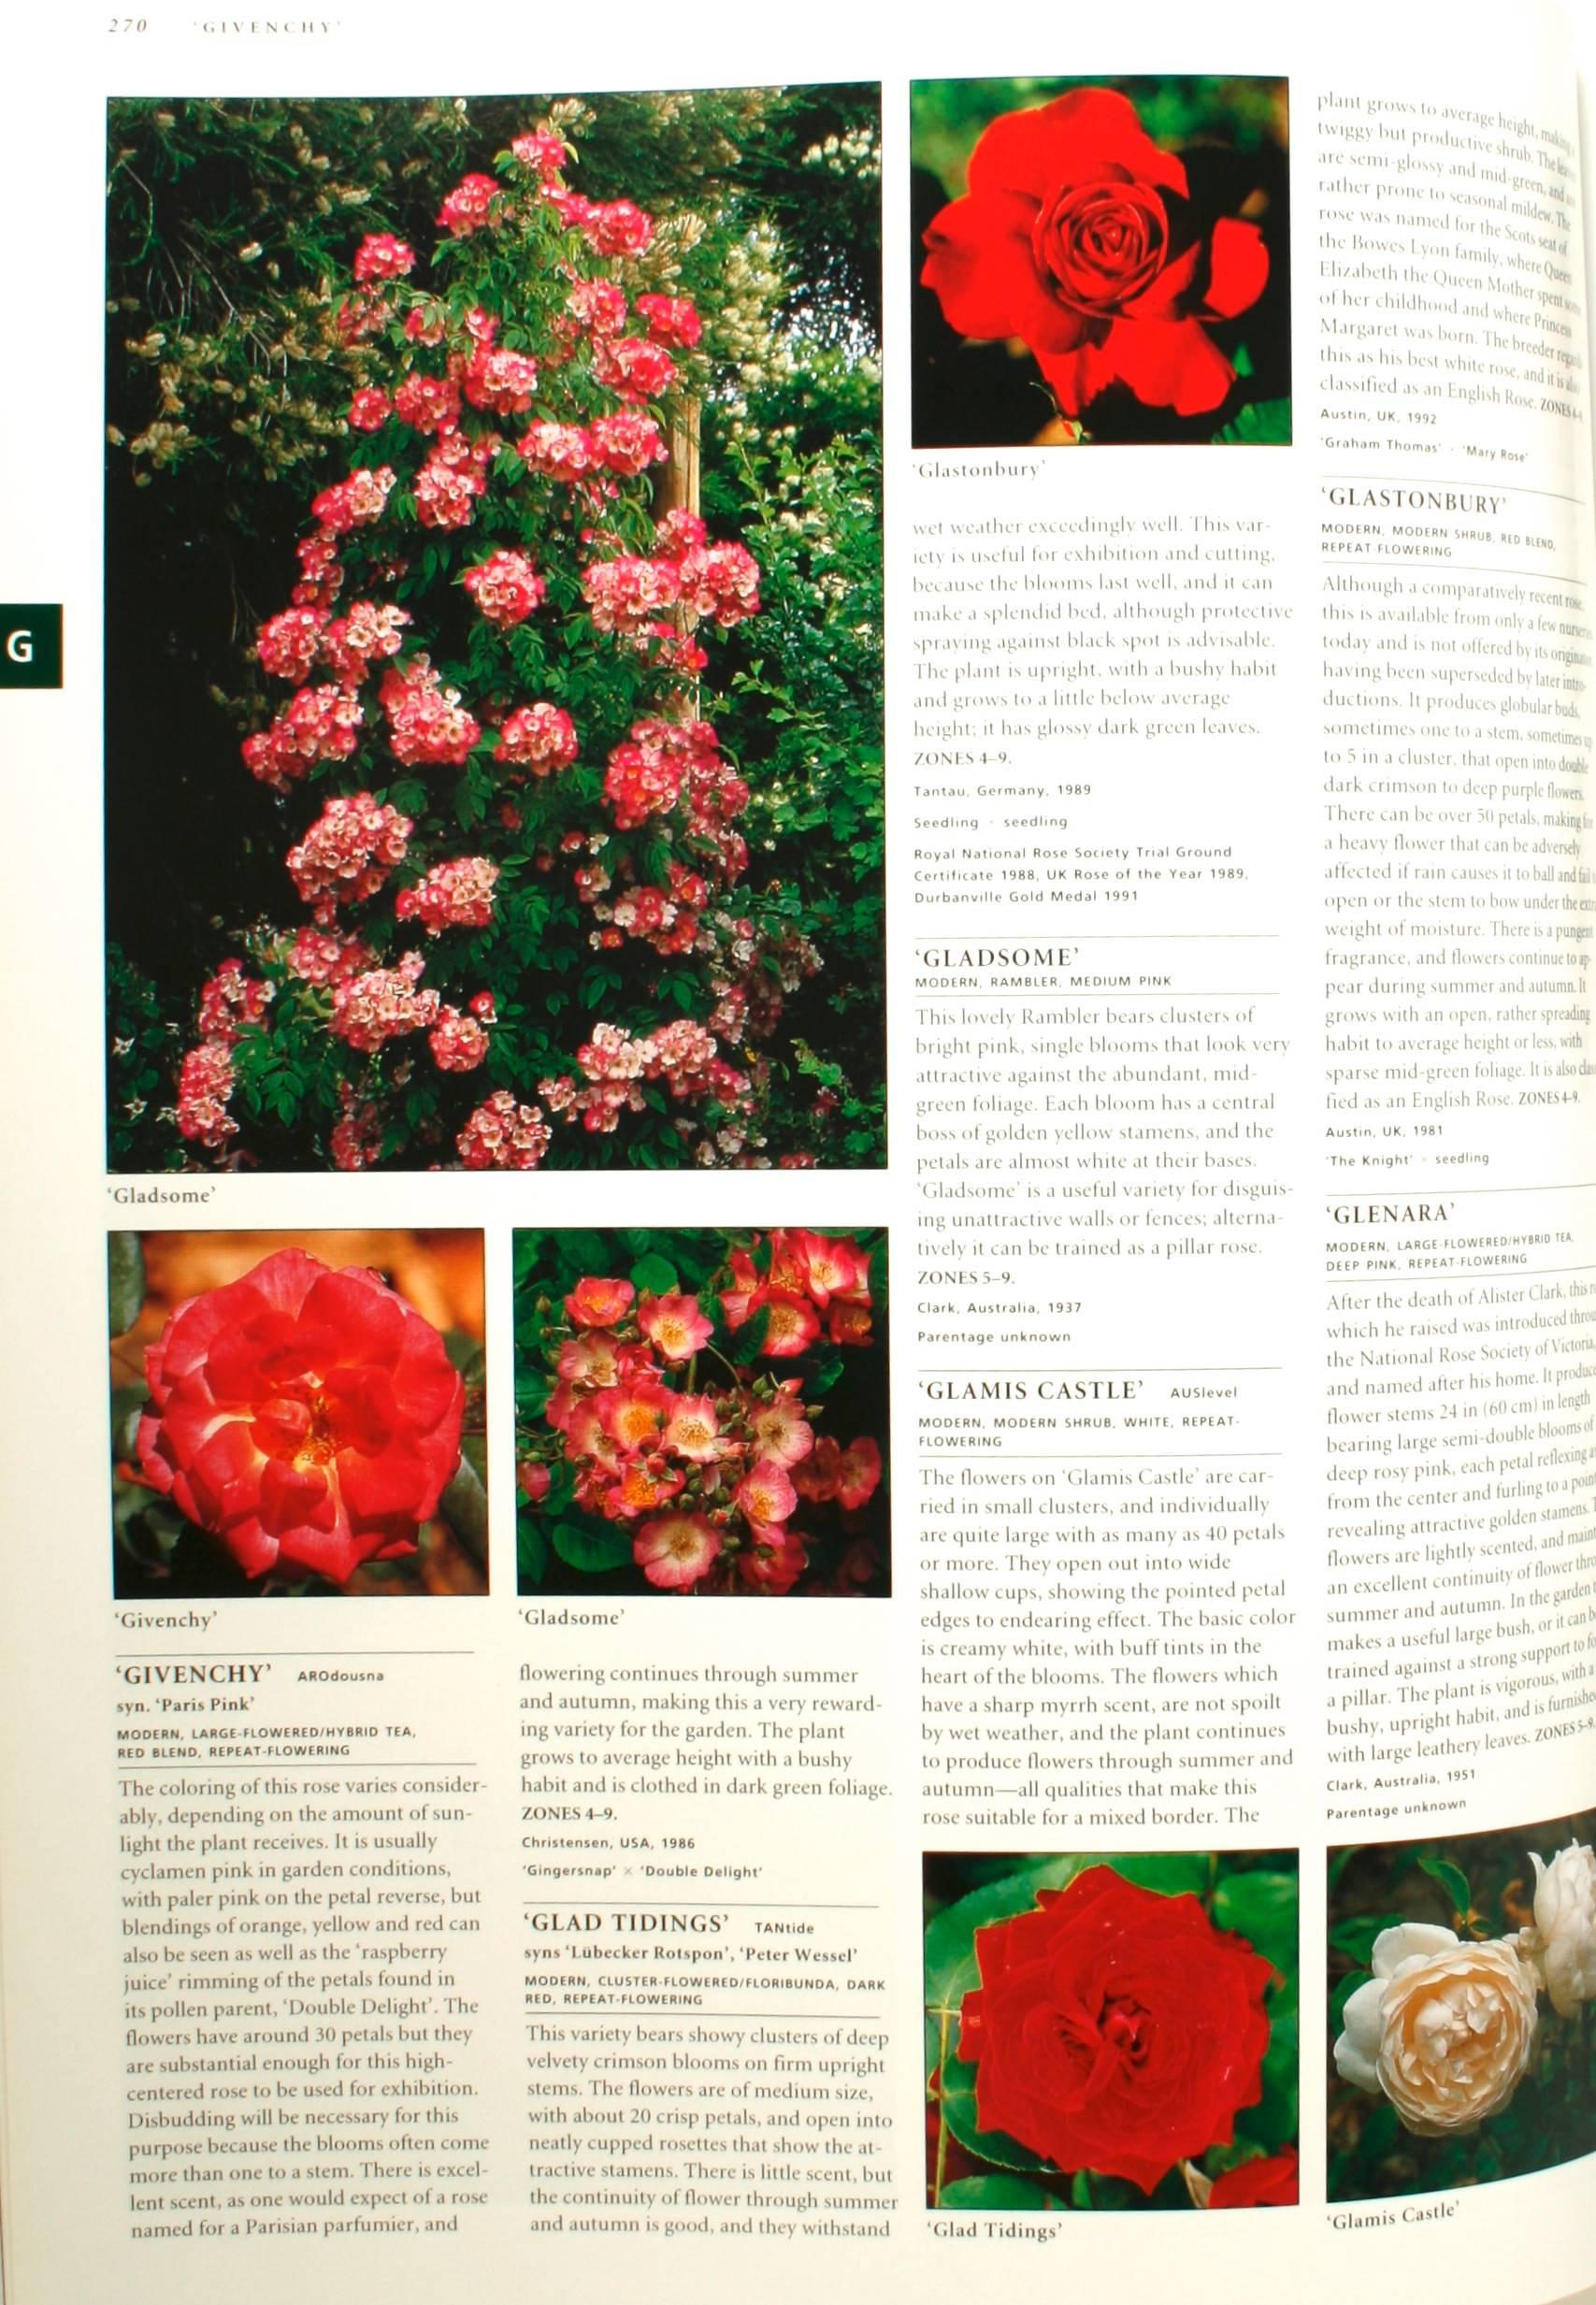 20th Century Botanica's Roses, The Encyclopedia of Roses